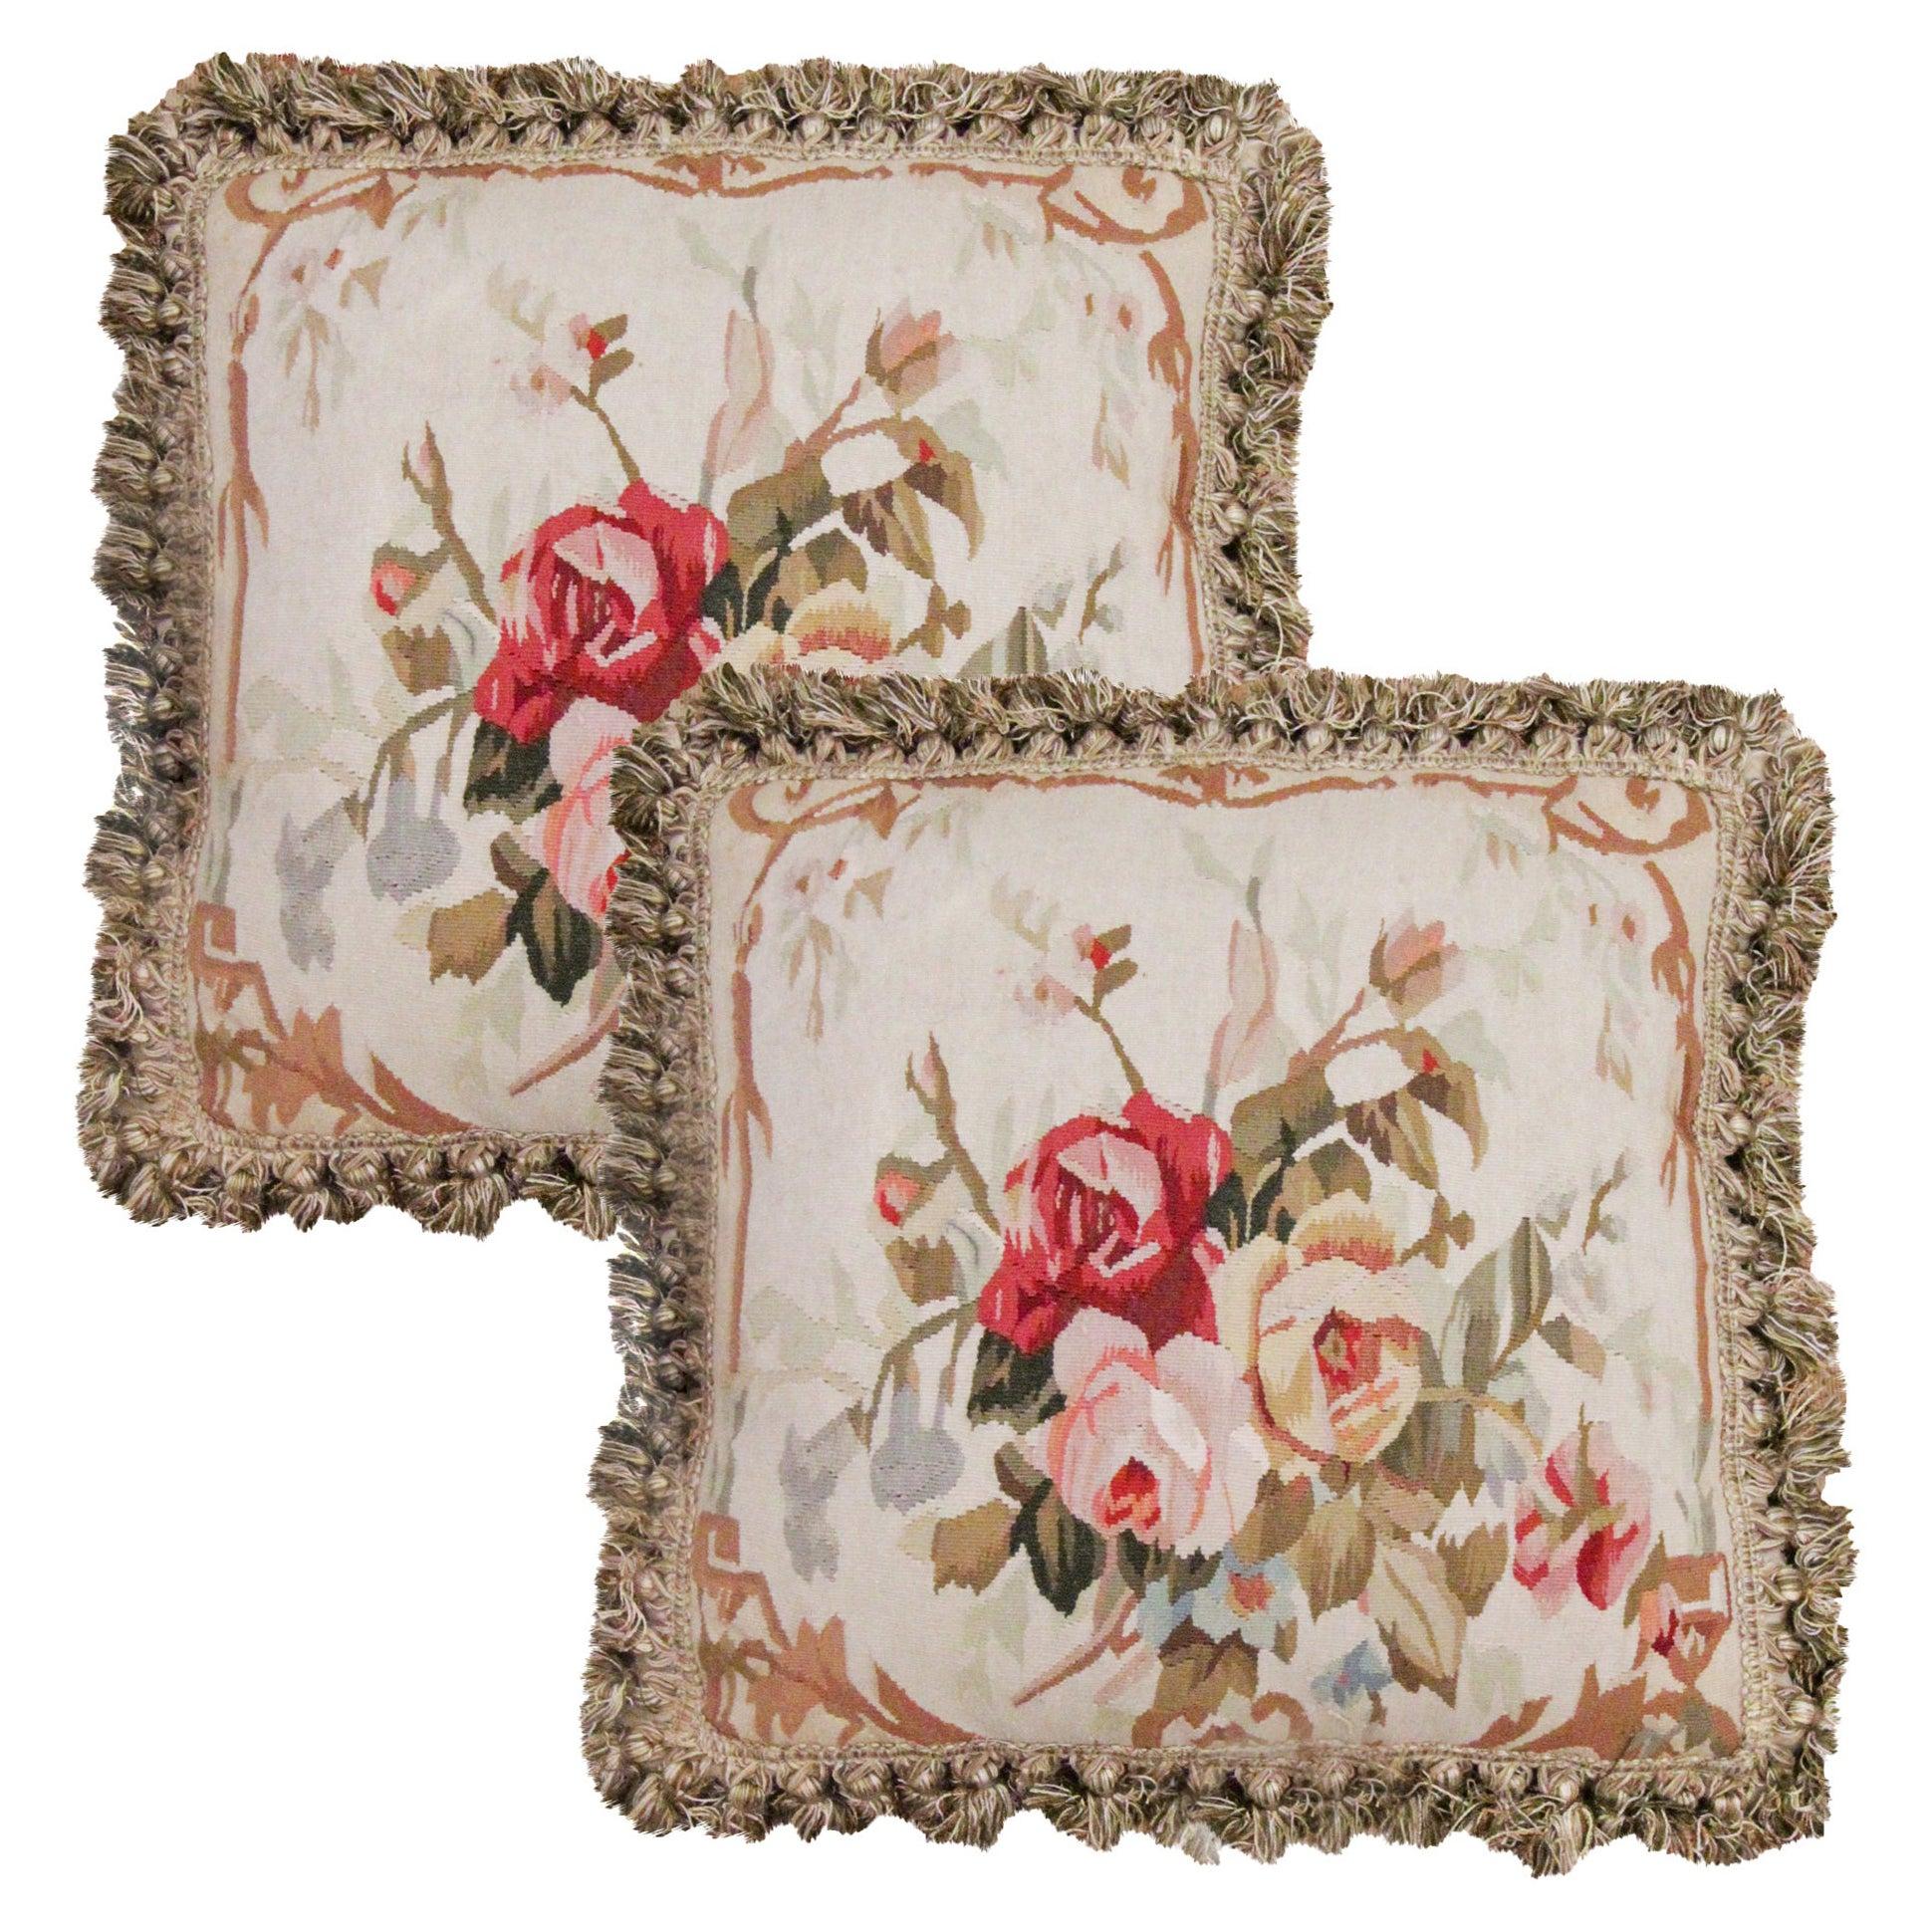 Pair of Vintage Aubusson Cushion Covers Handmade Floral Pillow Case